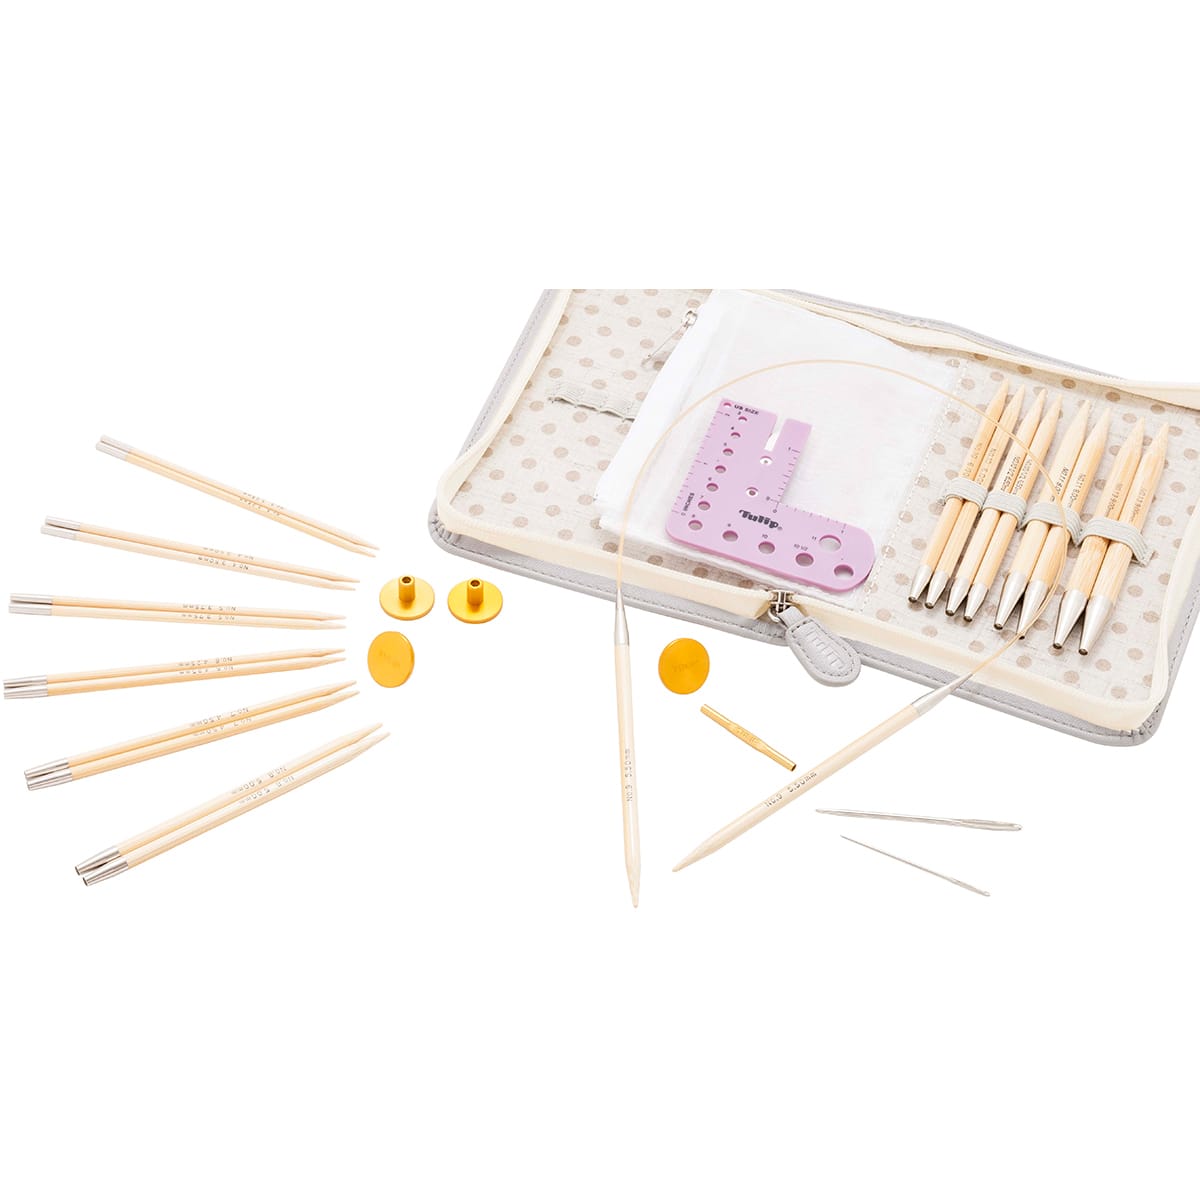 Double Ended Bamboo Knitting Needles Set, For Beginners And Professionals,  80 Pieces (16 Sizes X 5 Units), 2mm To 12mm, 25cm, With Canvas Storage Bag